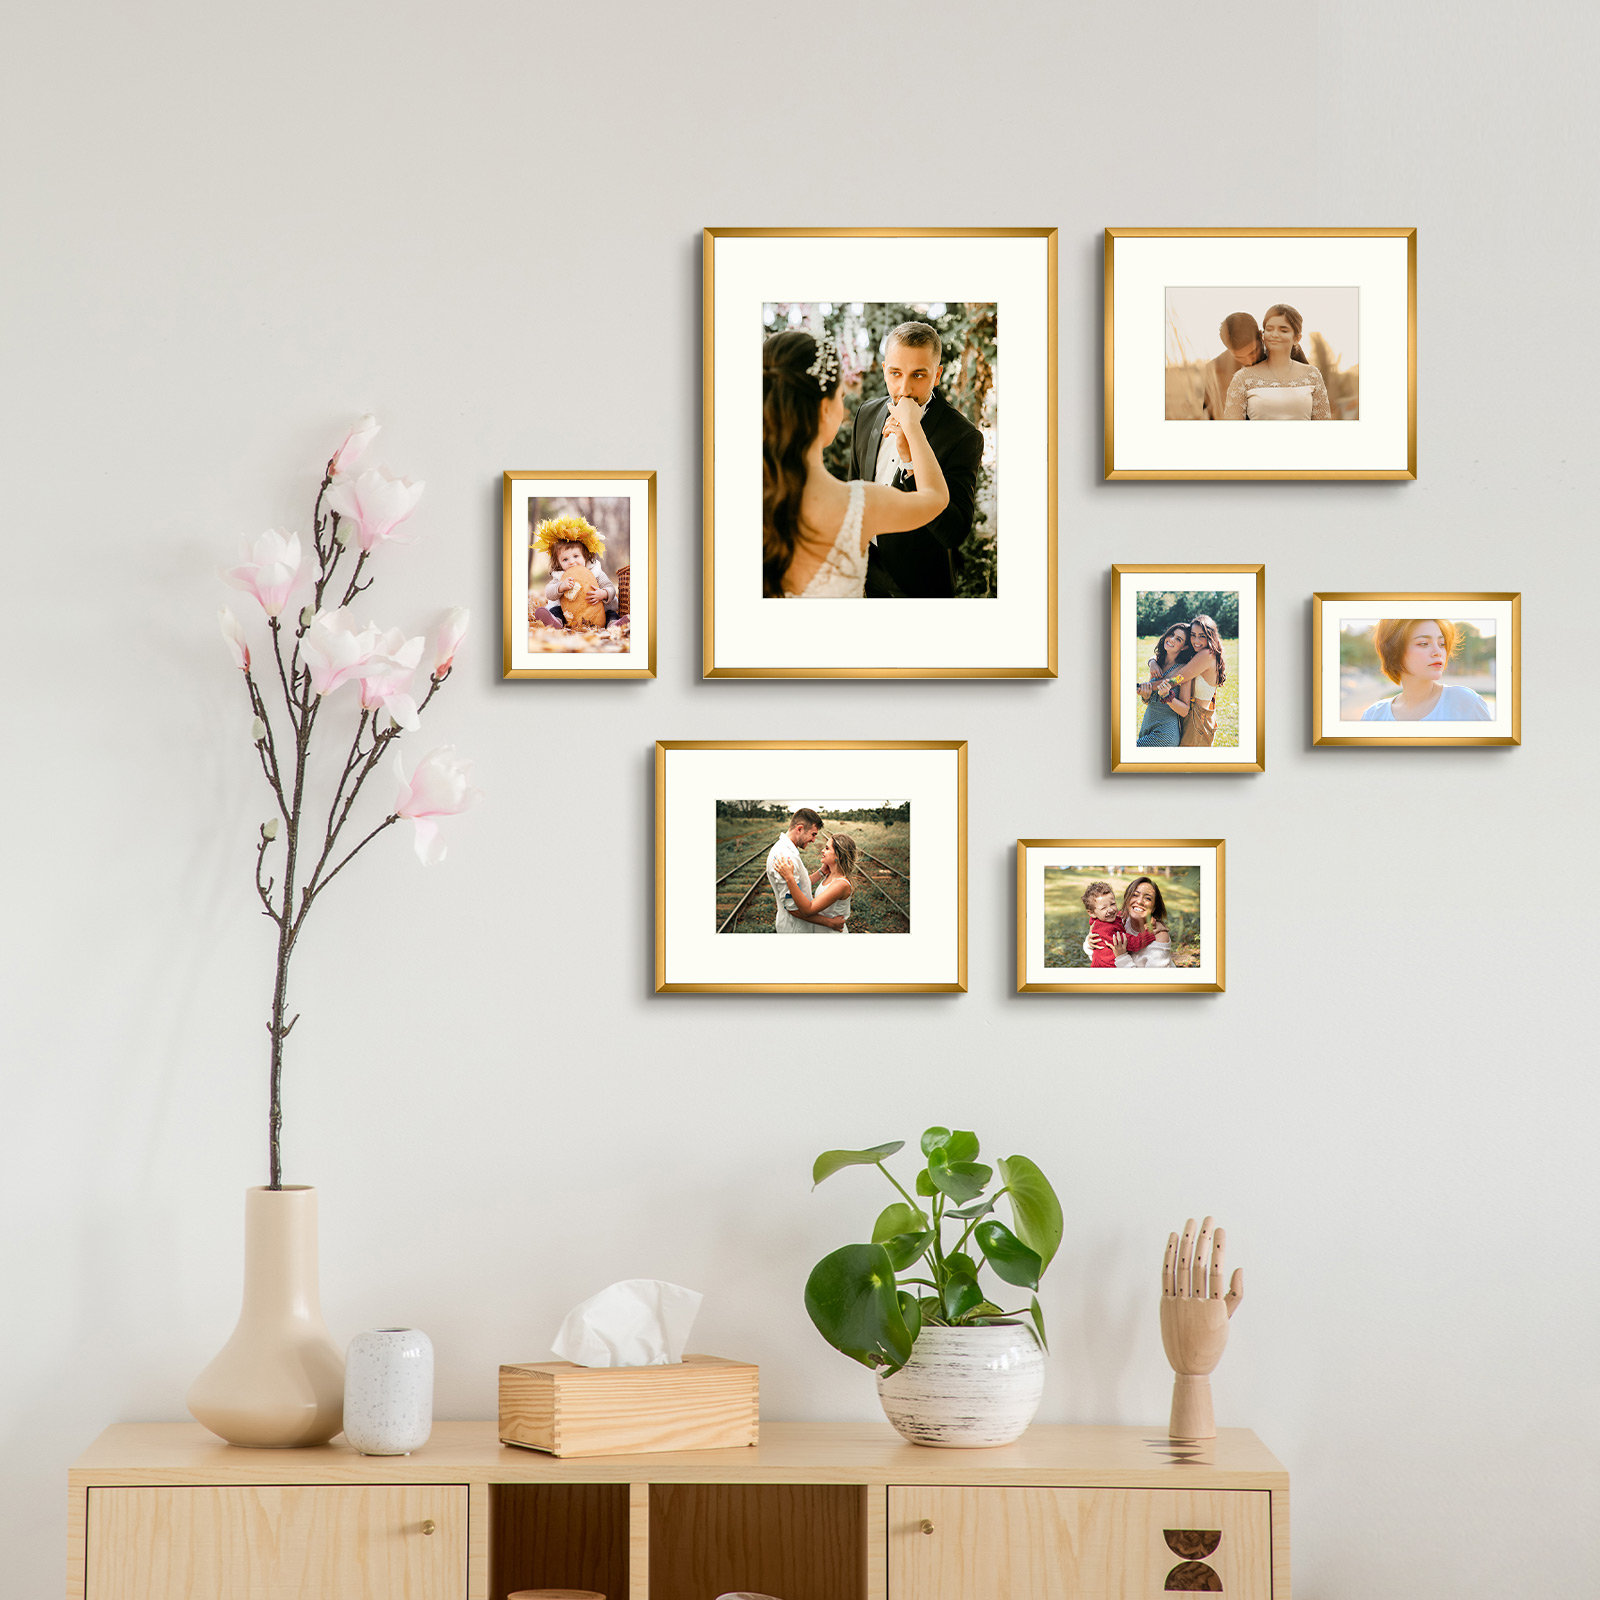 Set of 7 Aluminum Wall Frame with Ivory Mat Four 5x7 Two 8x10 One 11x14  Photo